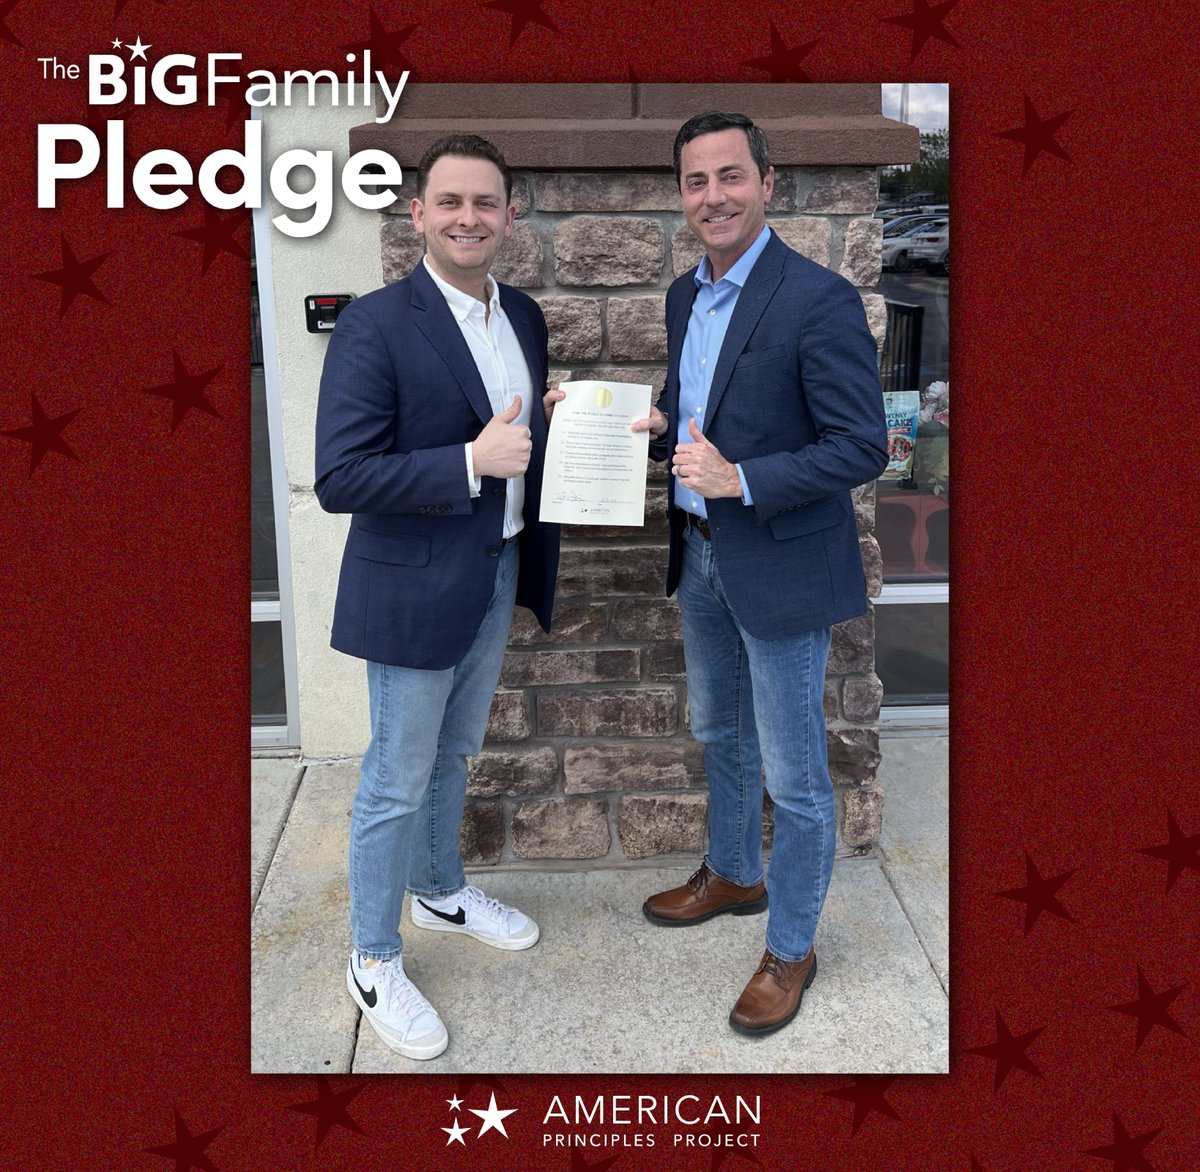 Thank you, @MayorStaggs, for signing our Big Family Pledge! Trent will be a strong fighter for families in the U.S. Senate.